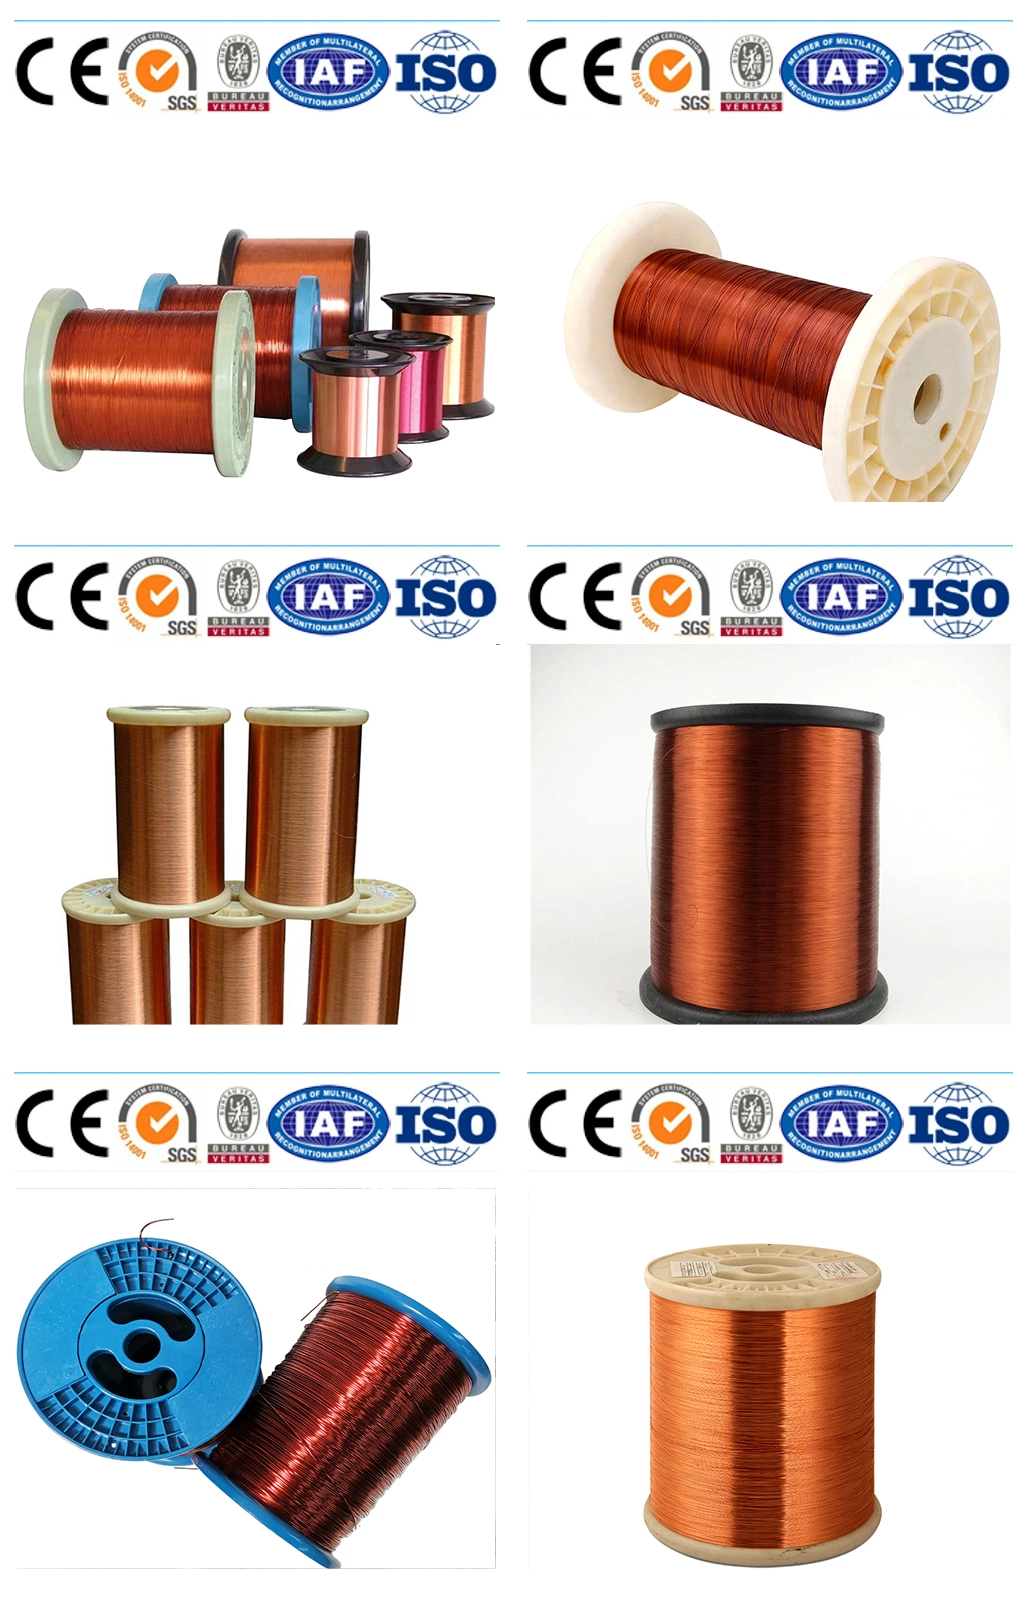 Copper Wire Factory Price 29 Swg CCA Enamelled Copper Wire Winding Pure